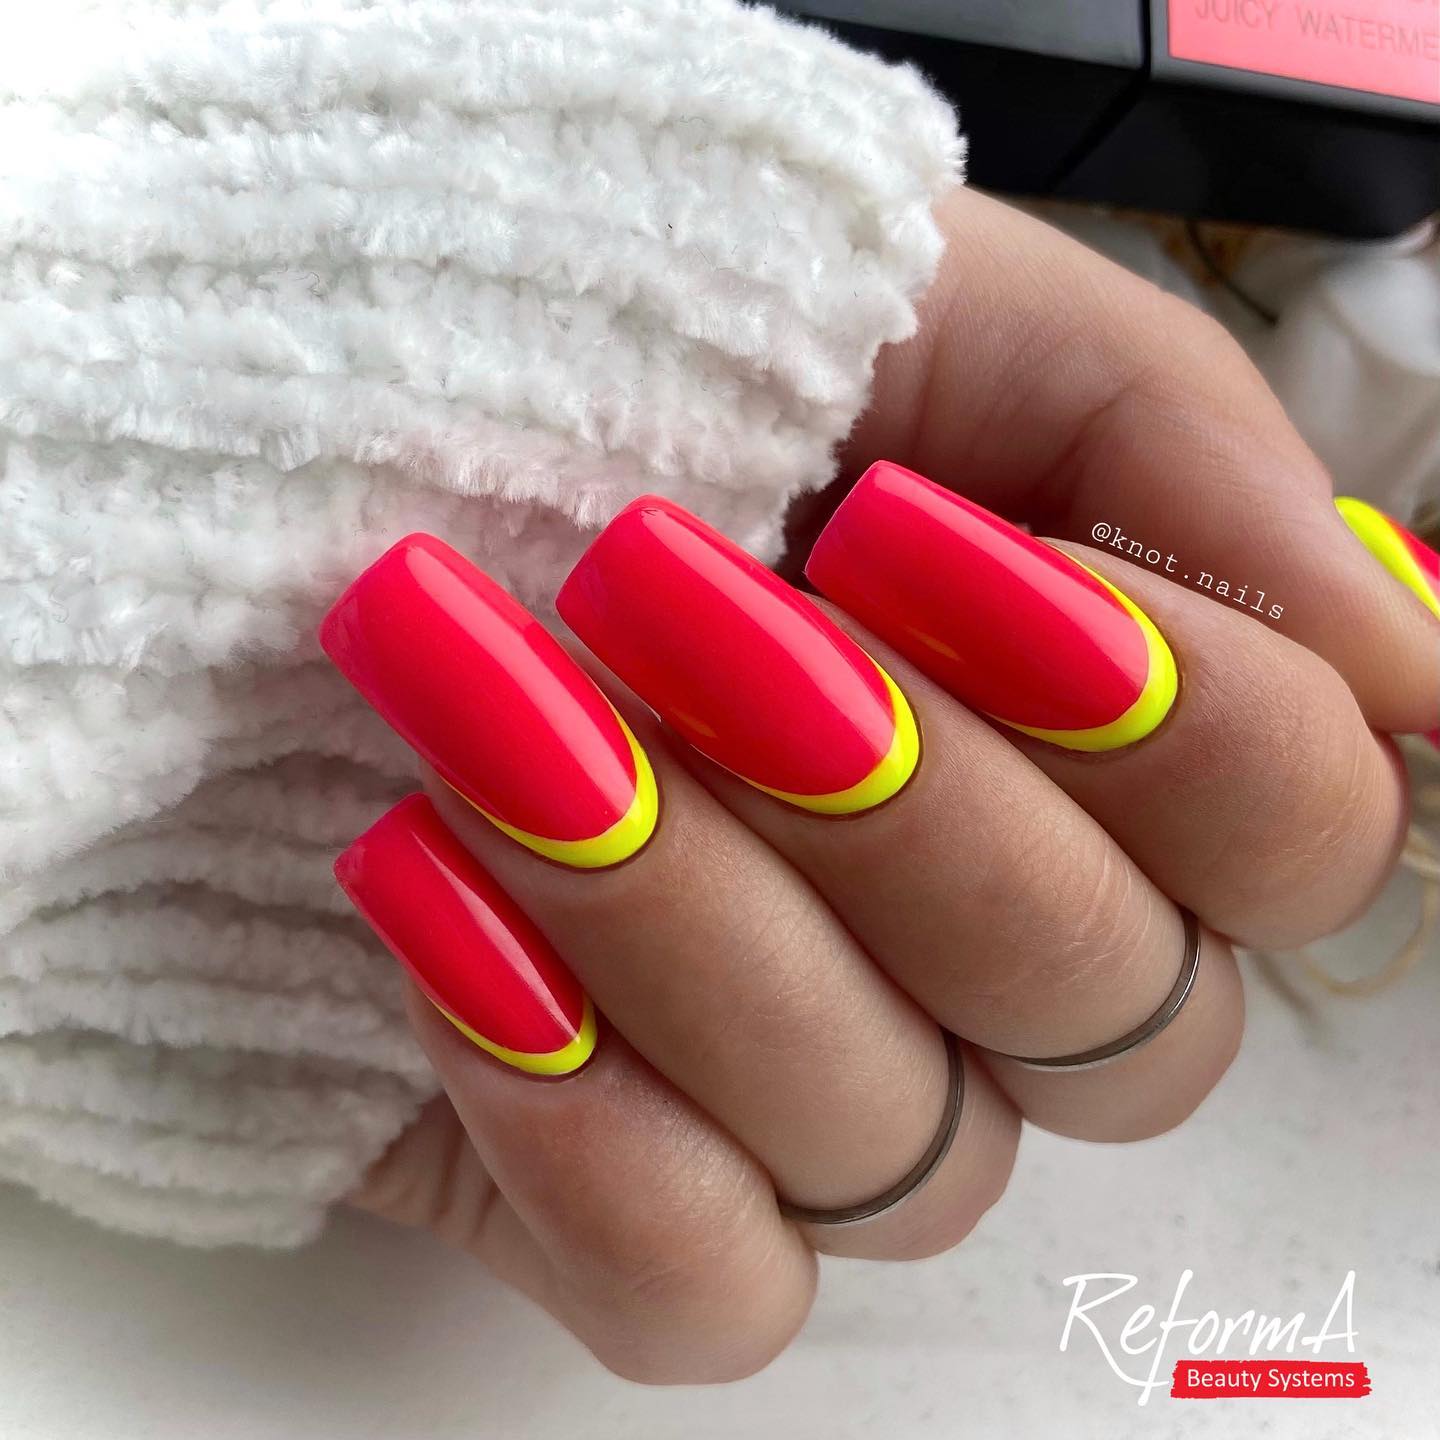 Bright Red Square Nails with Bright Yellow Design